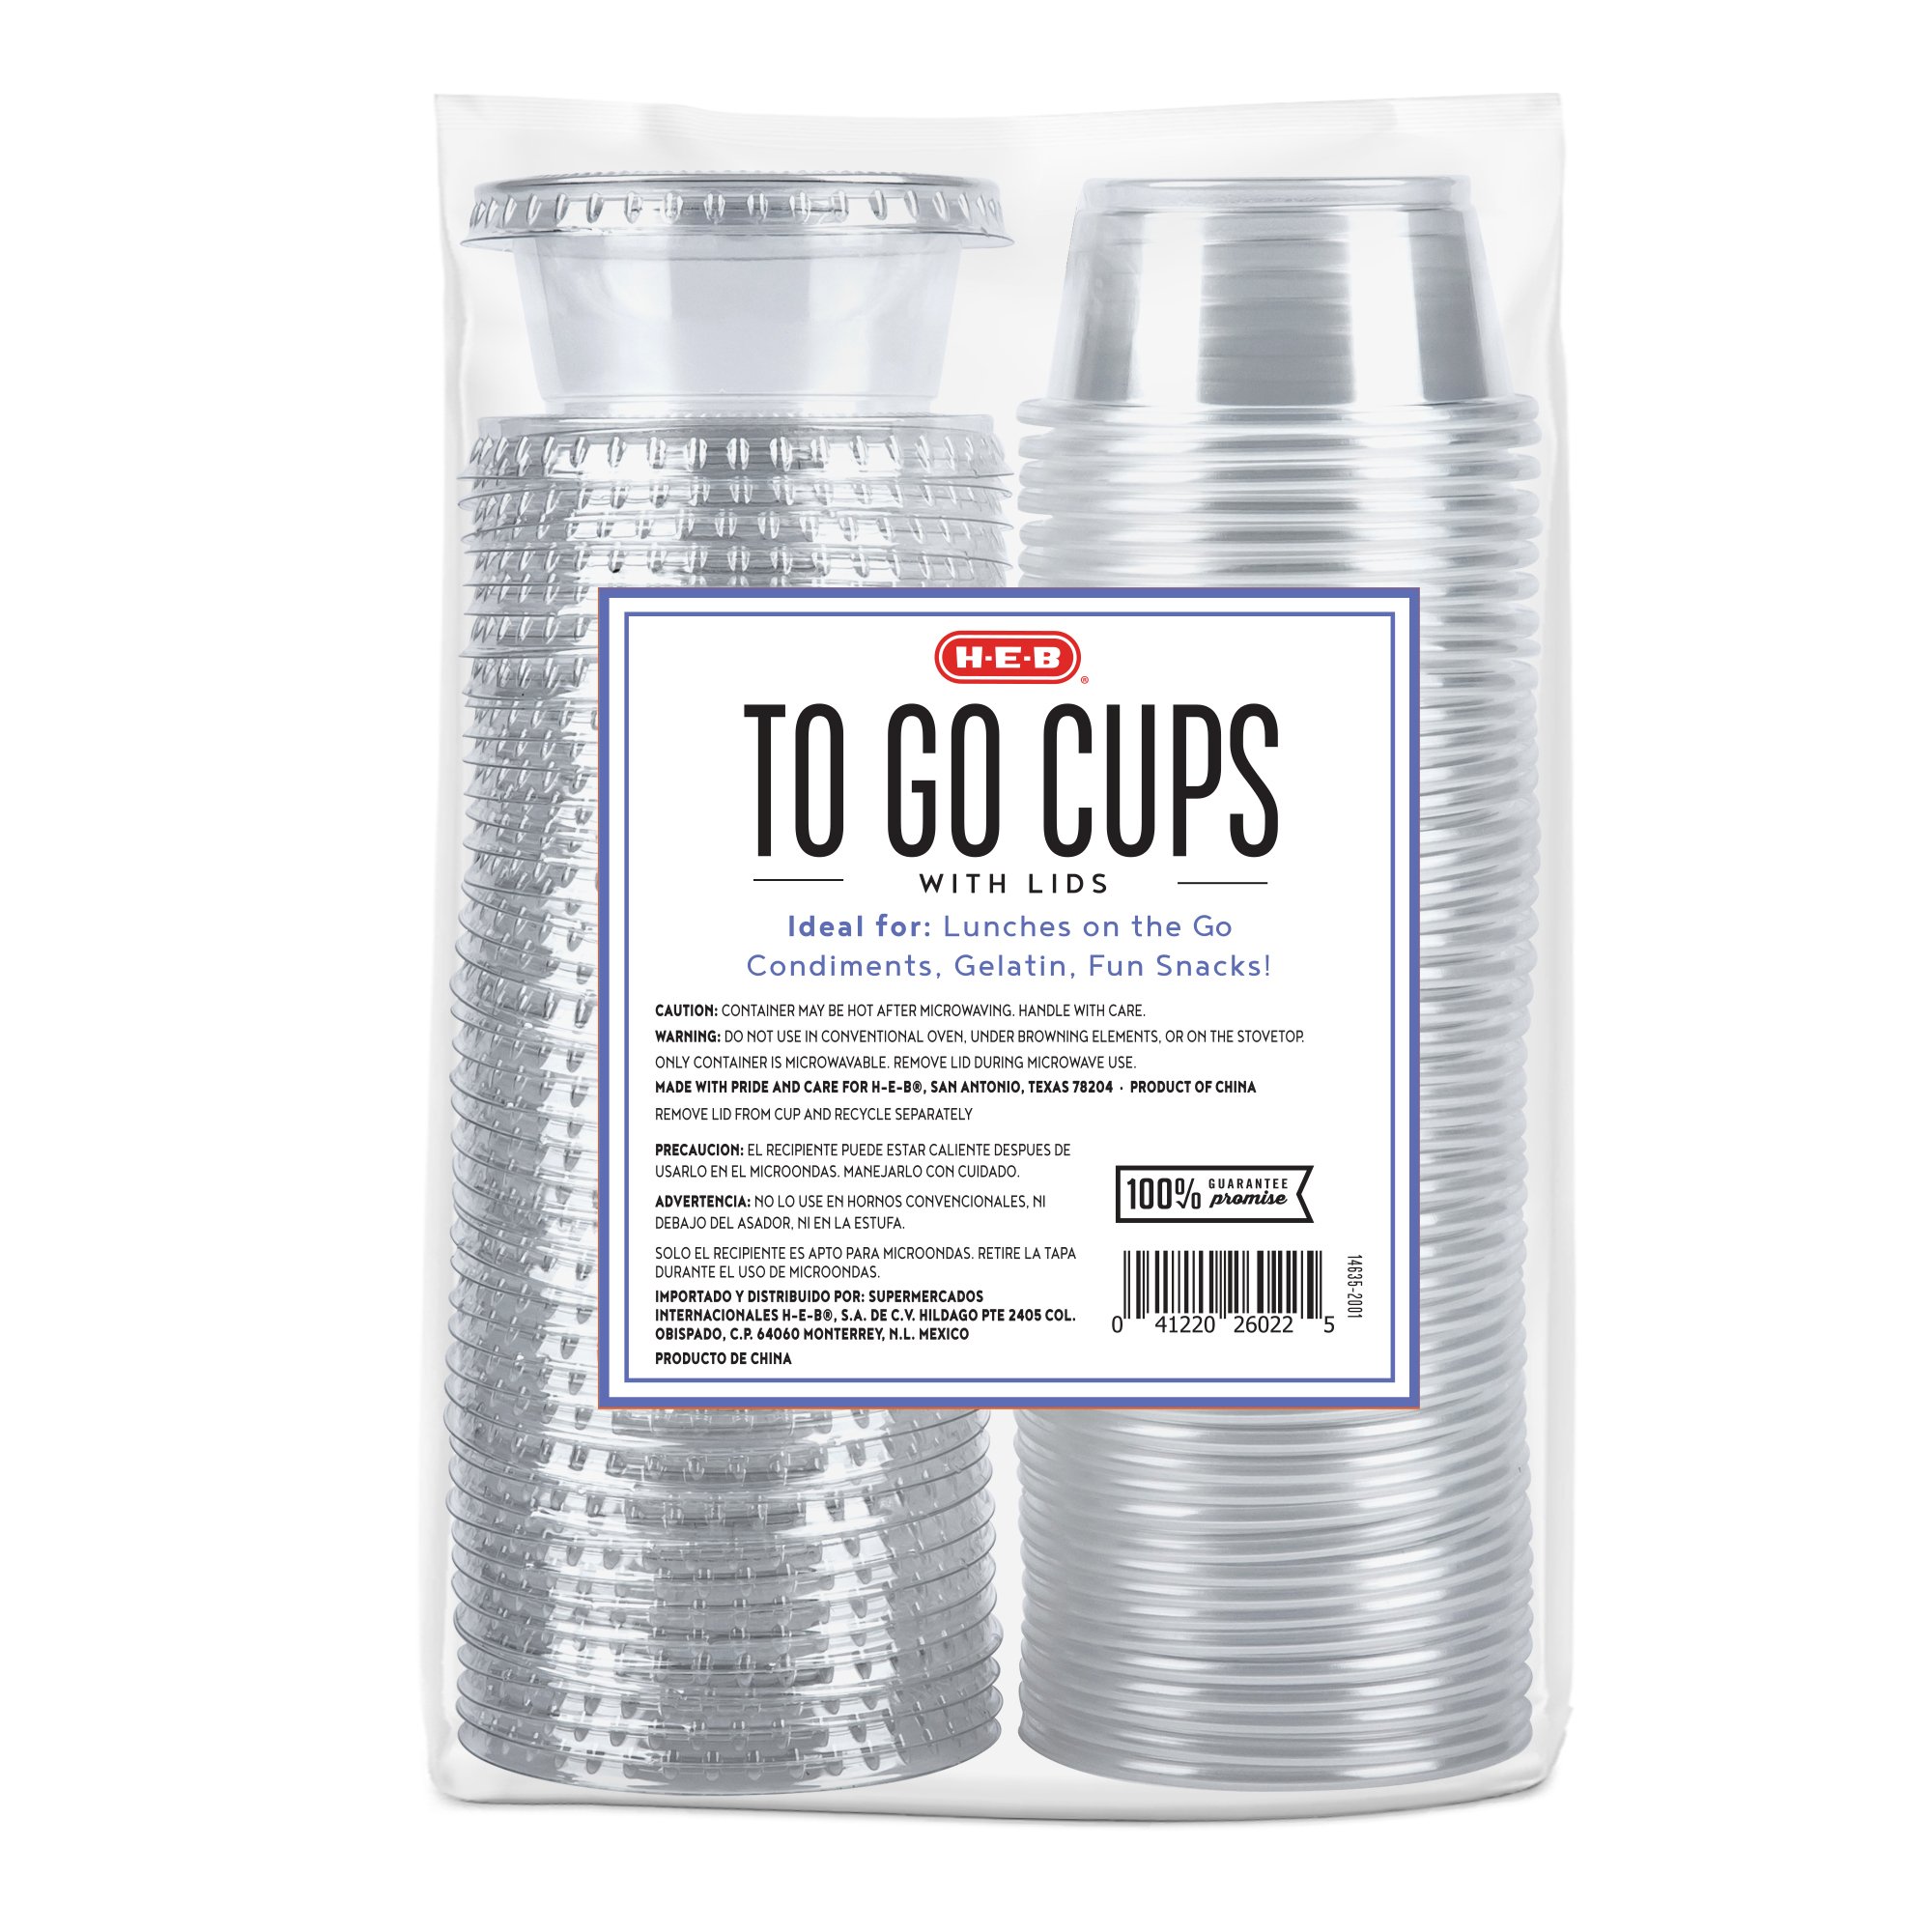 Ball 20 oz Aluminum Cup Recyclable Party Cups - Shop Drinkware at H-E-B